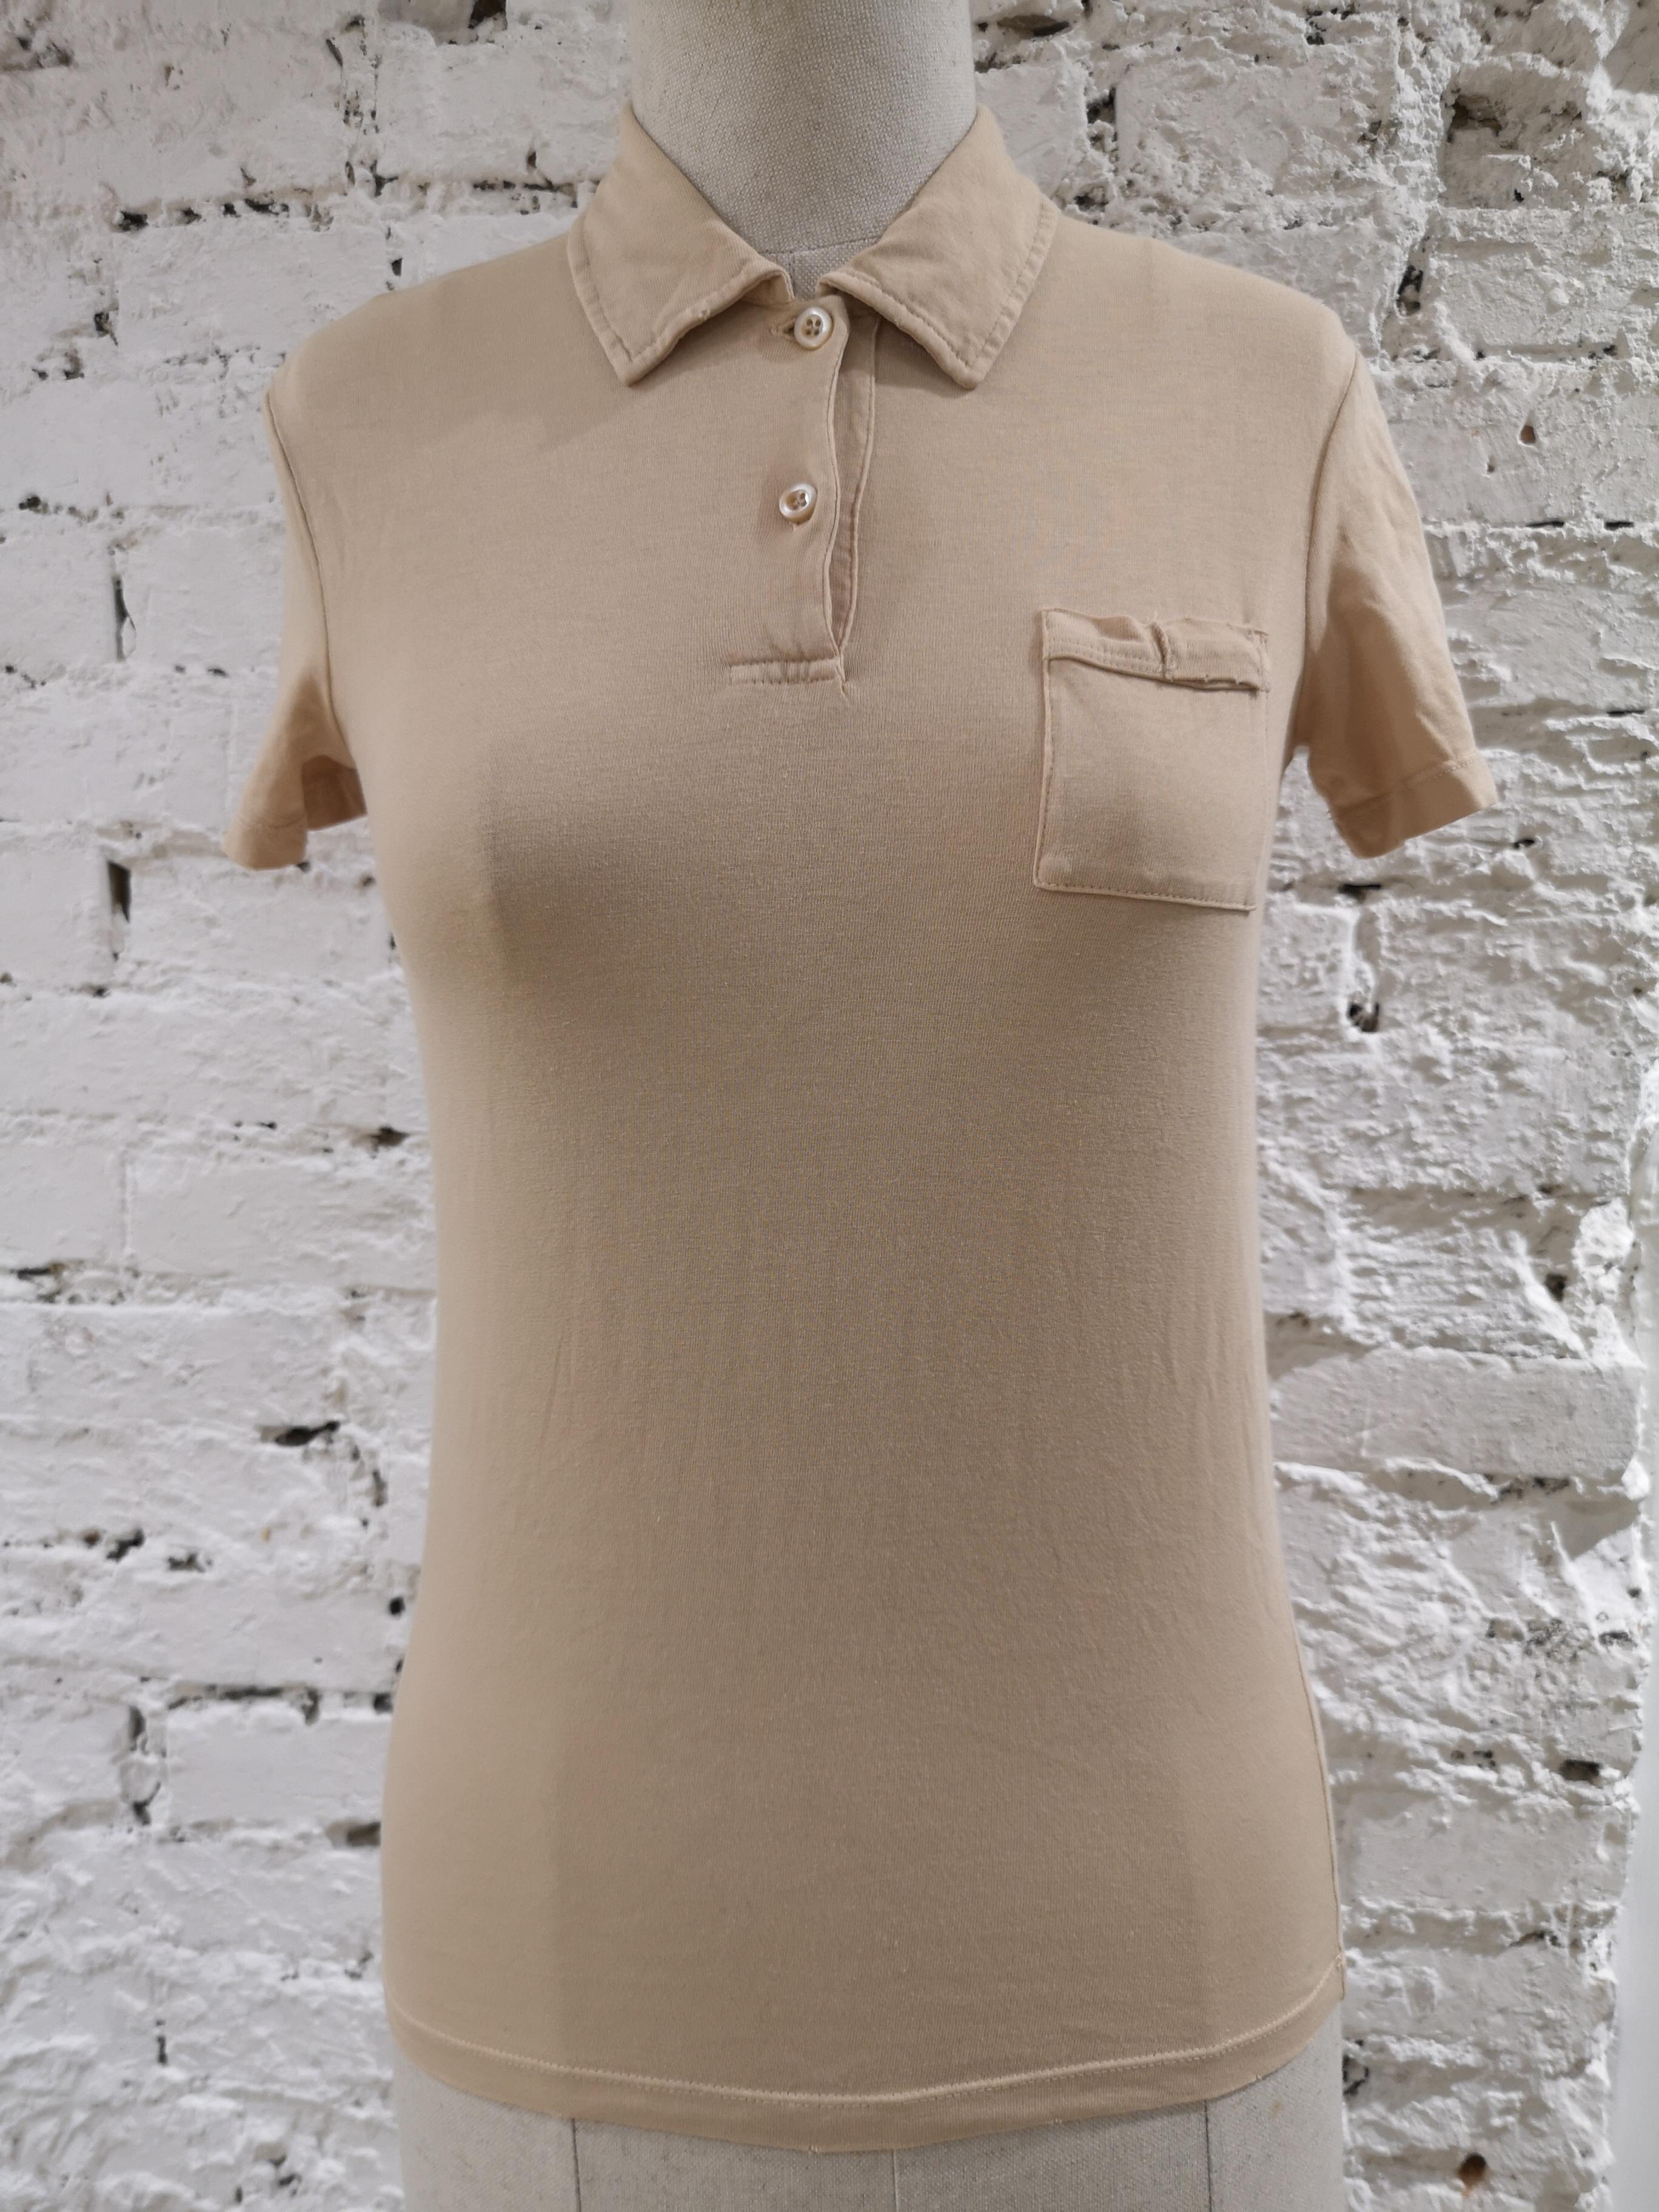 Prada beige cotton t-shirt
totally made in italy in size 40